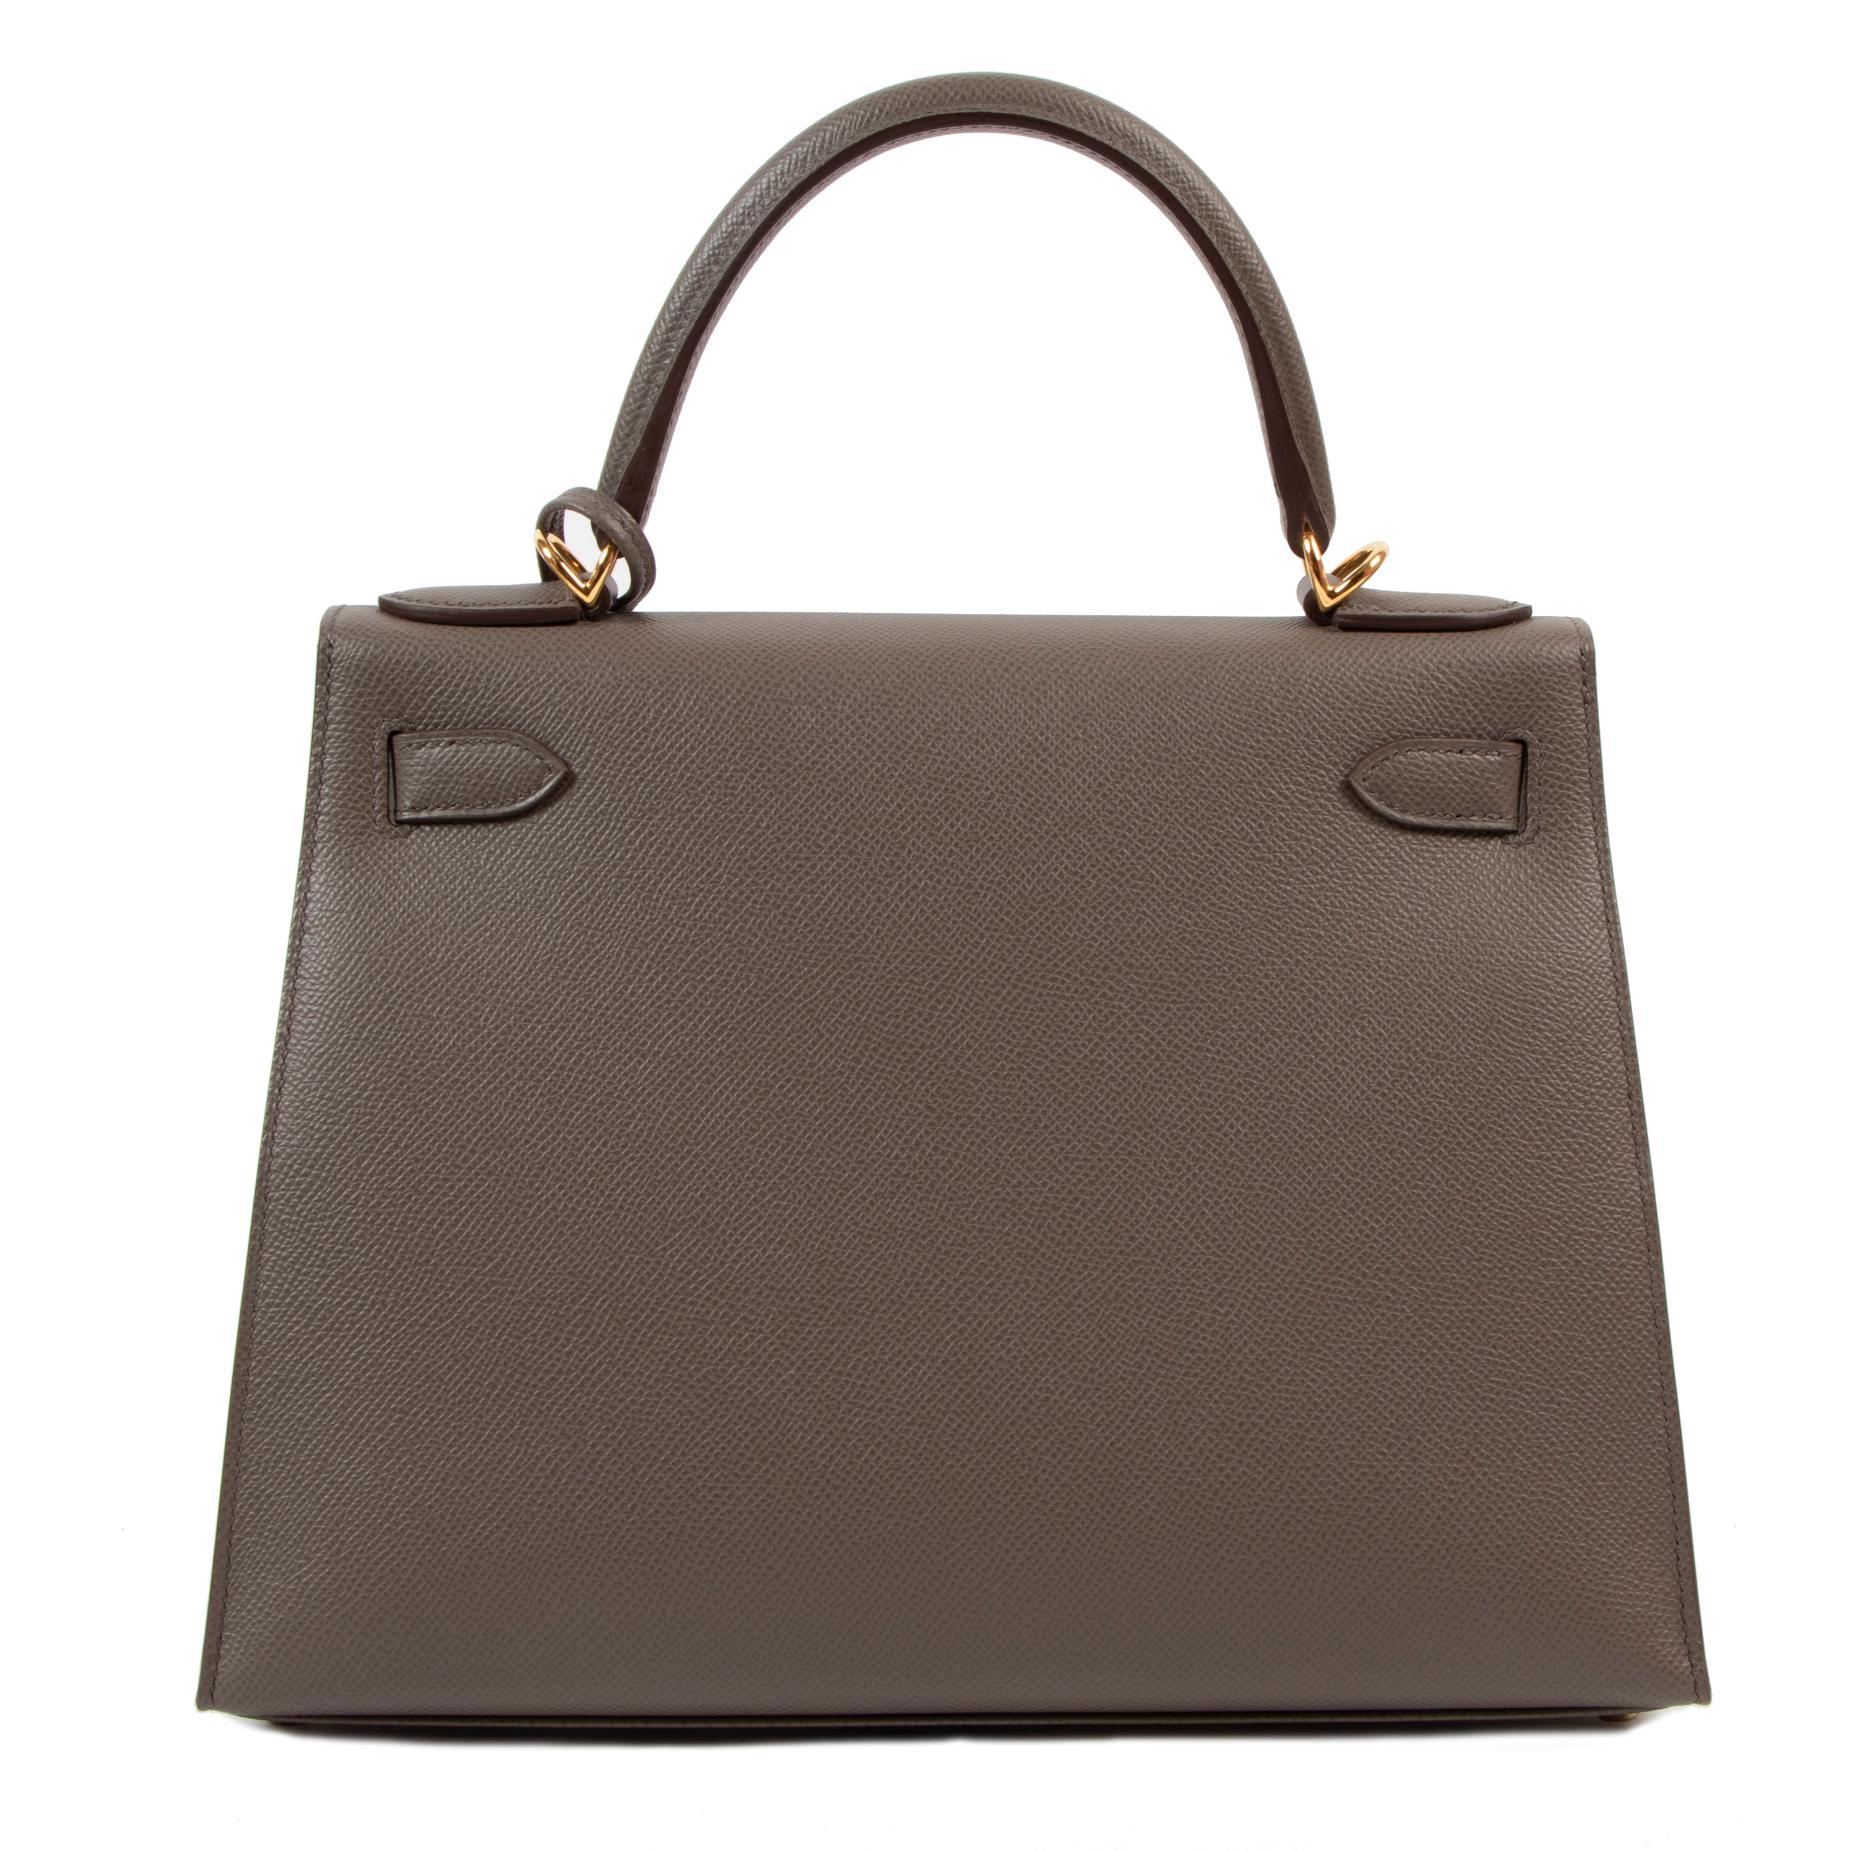 BRAND NEW

Hermès Kelly 28 Veau Epsom Gris Etain GHW

A true classic, this royal Hermès Kelly bag in Gris Etain is a timeless piece to have and to hold. The luxurious design of this beauty is accentuated by the gold-toned hardware. Wear this beauty